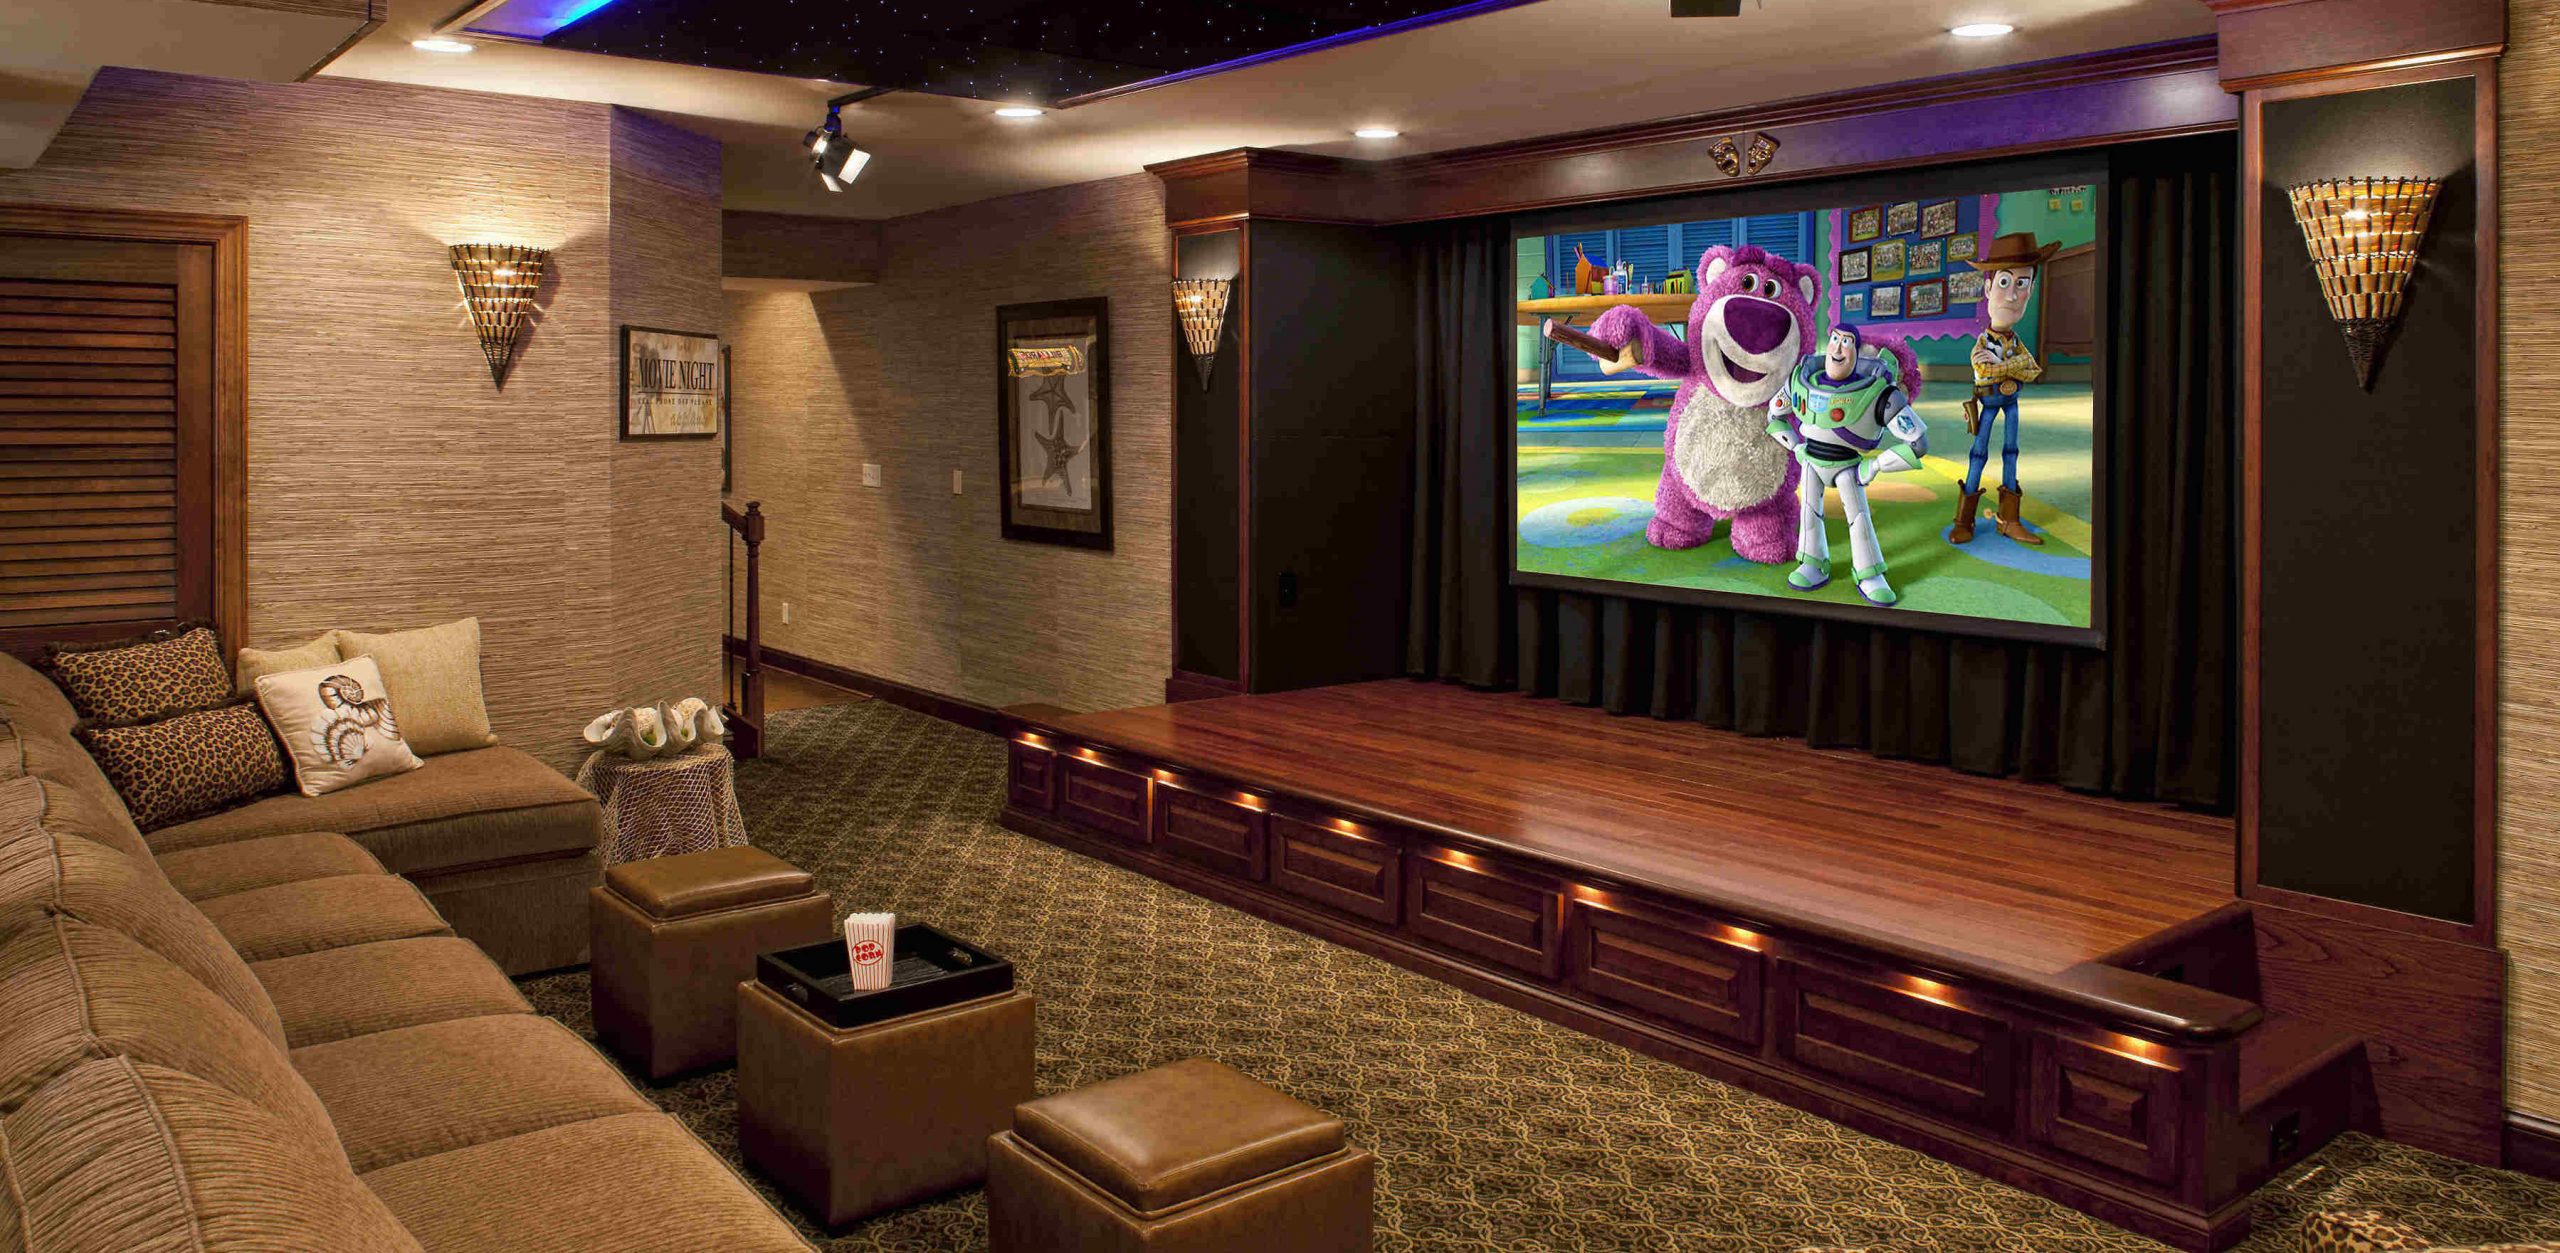 A home audio video theater with a stage